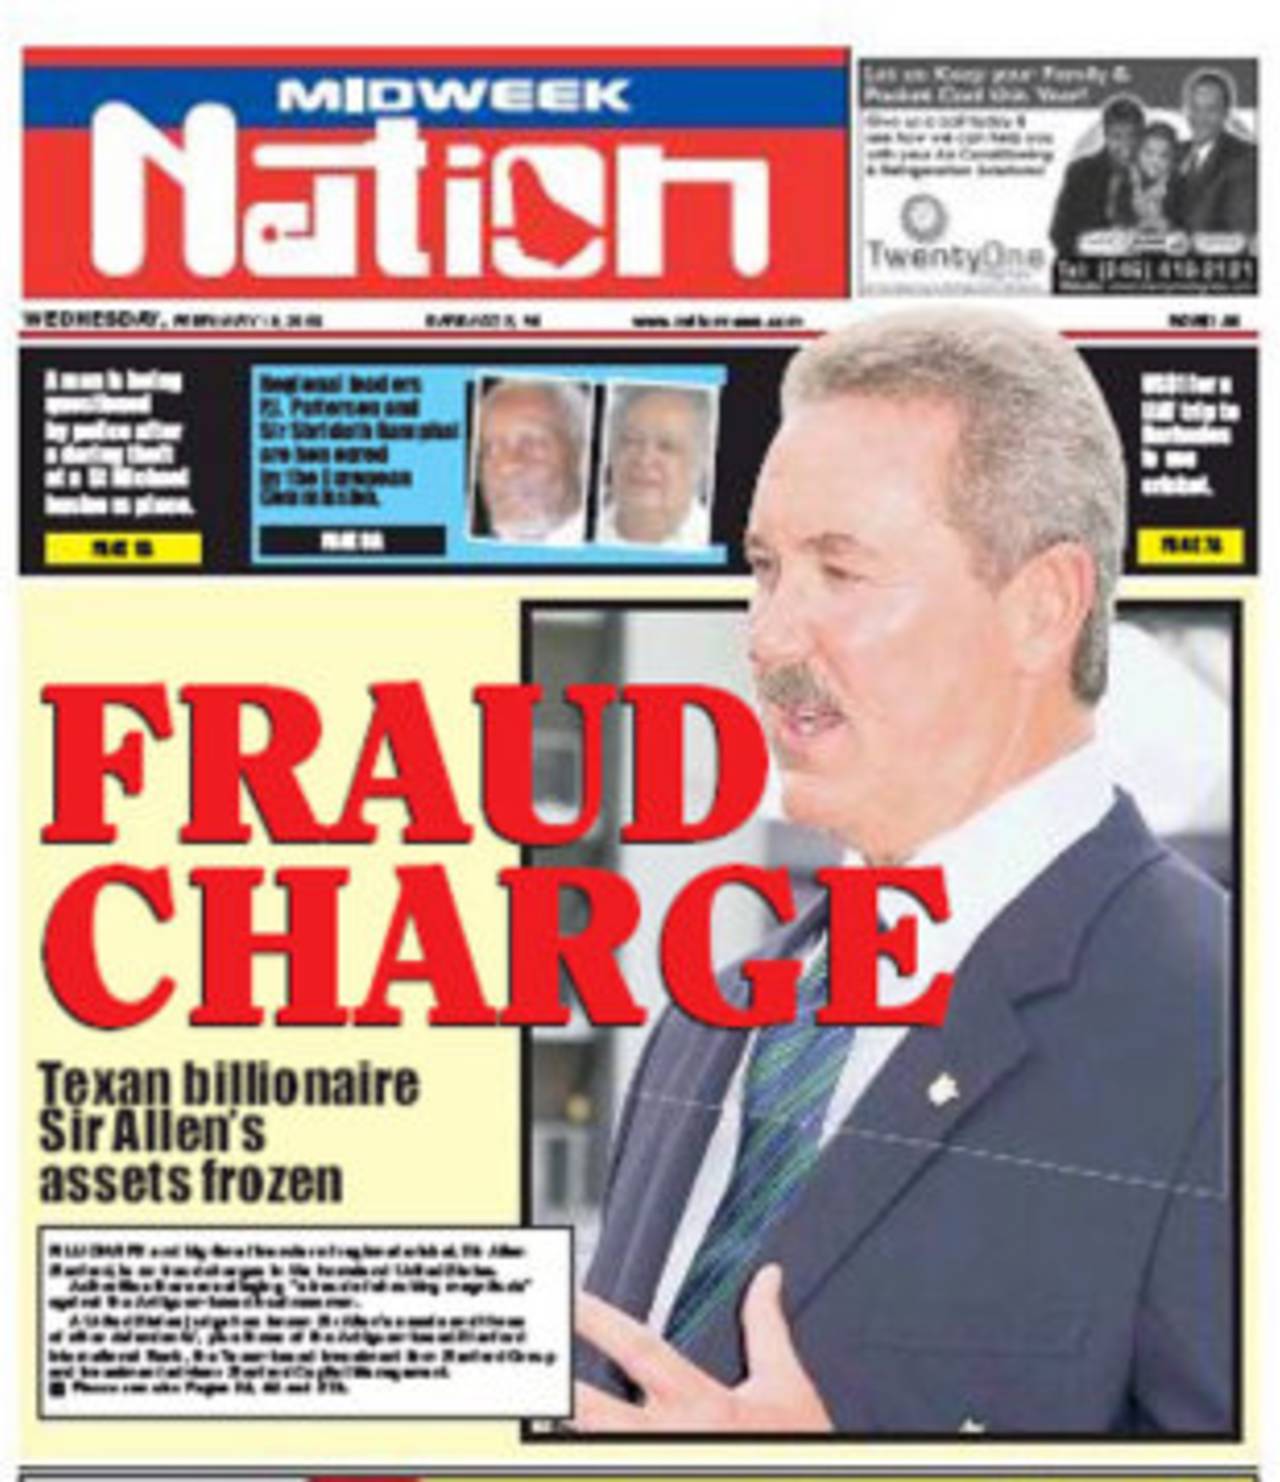 The front page of Barbados' Daily Nation on the latest Stanford crisis, February 18, 2009